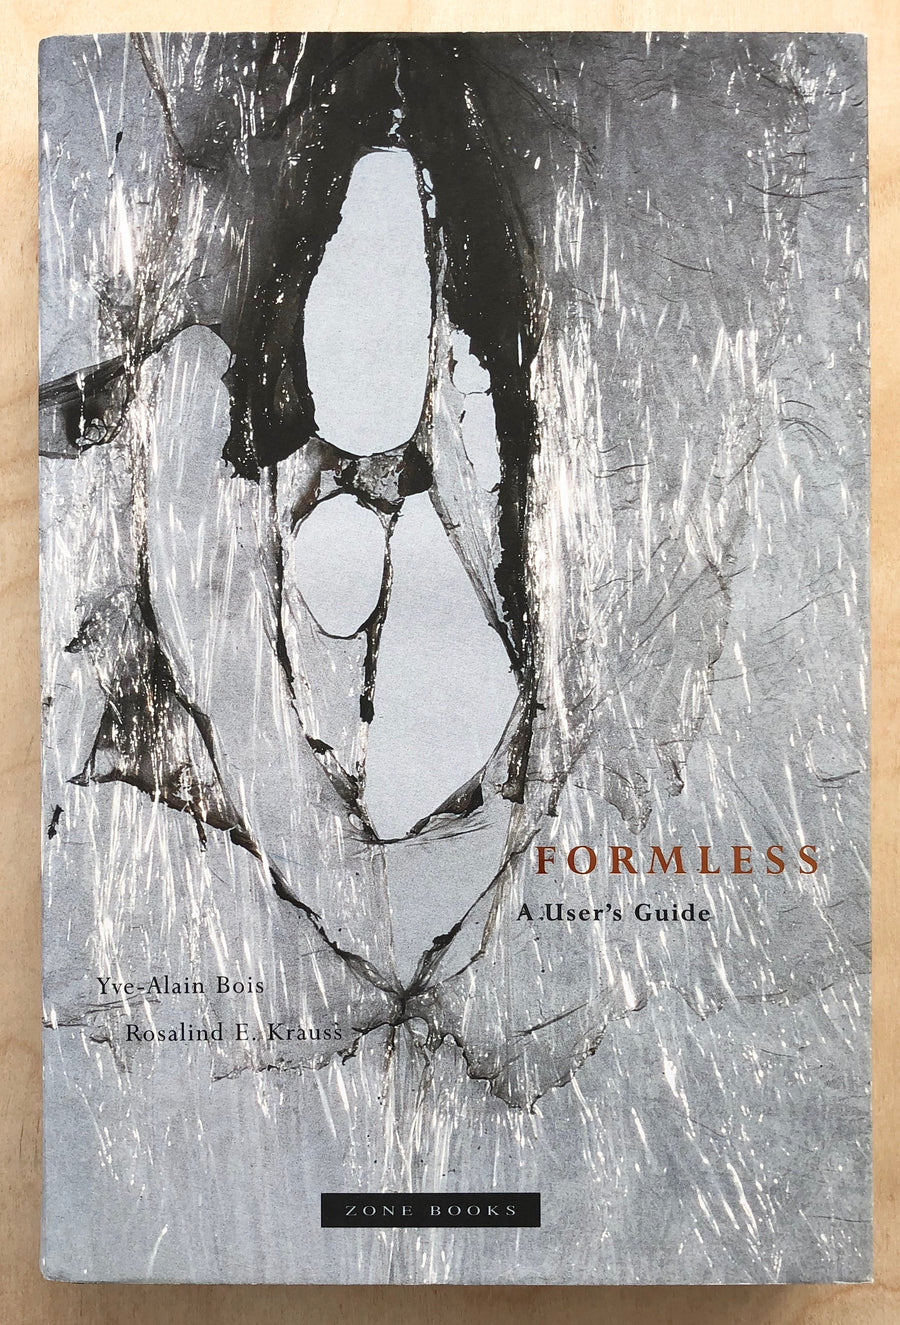 FORMLESS: A USER'S GUIDE by Yve-Alain Bois and Rosalind E. Krauss